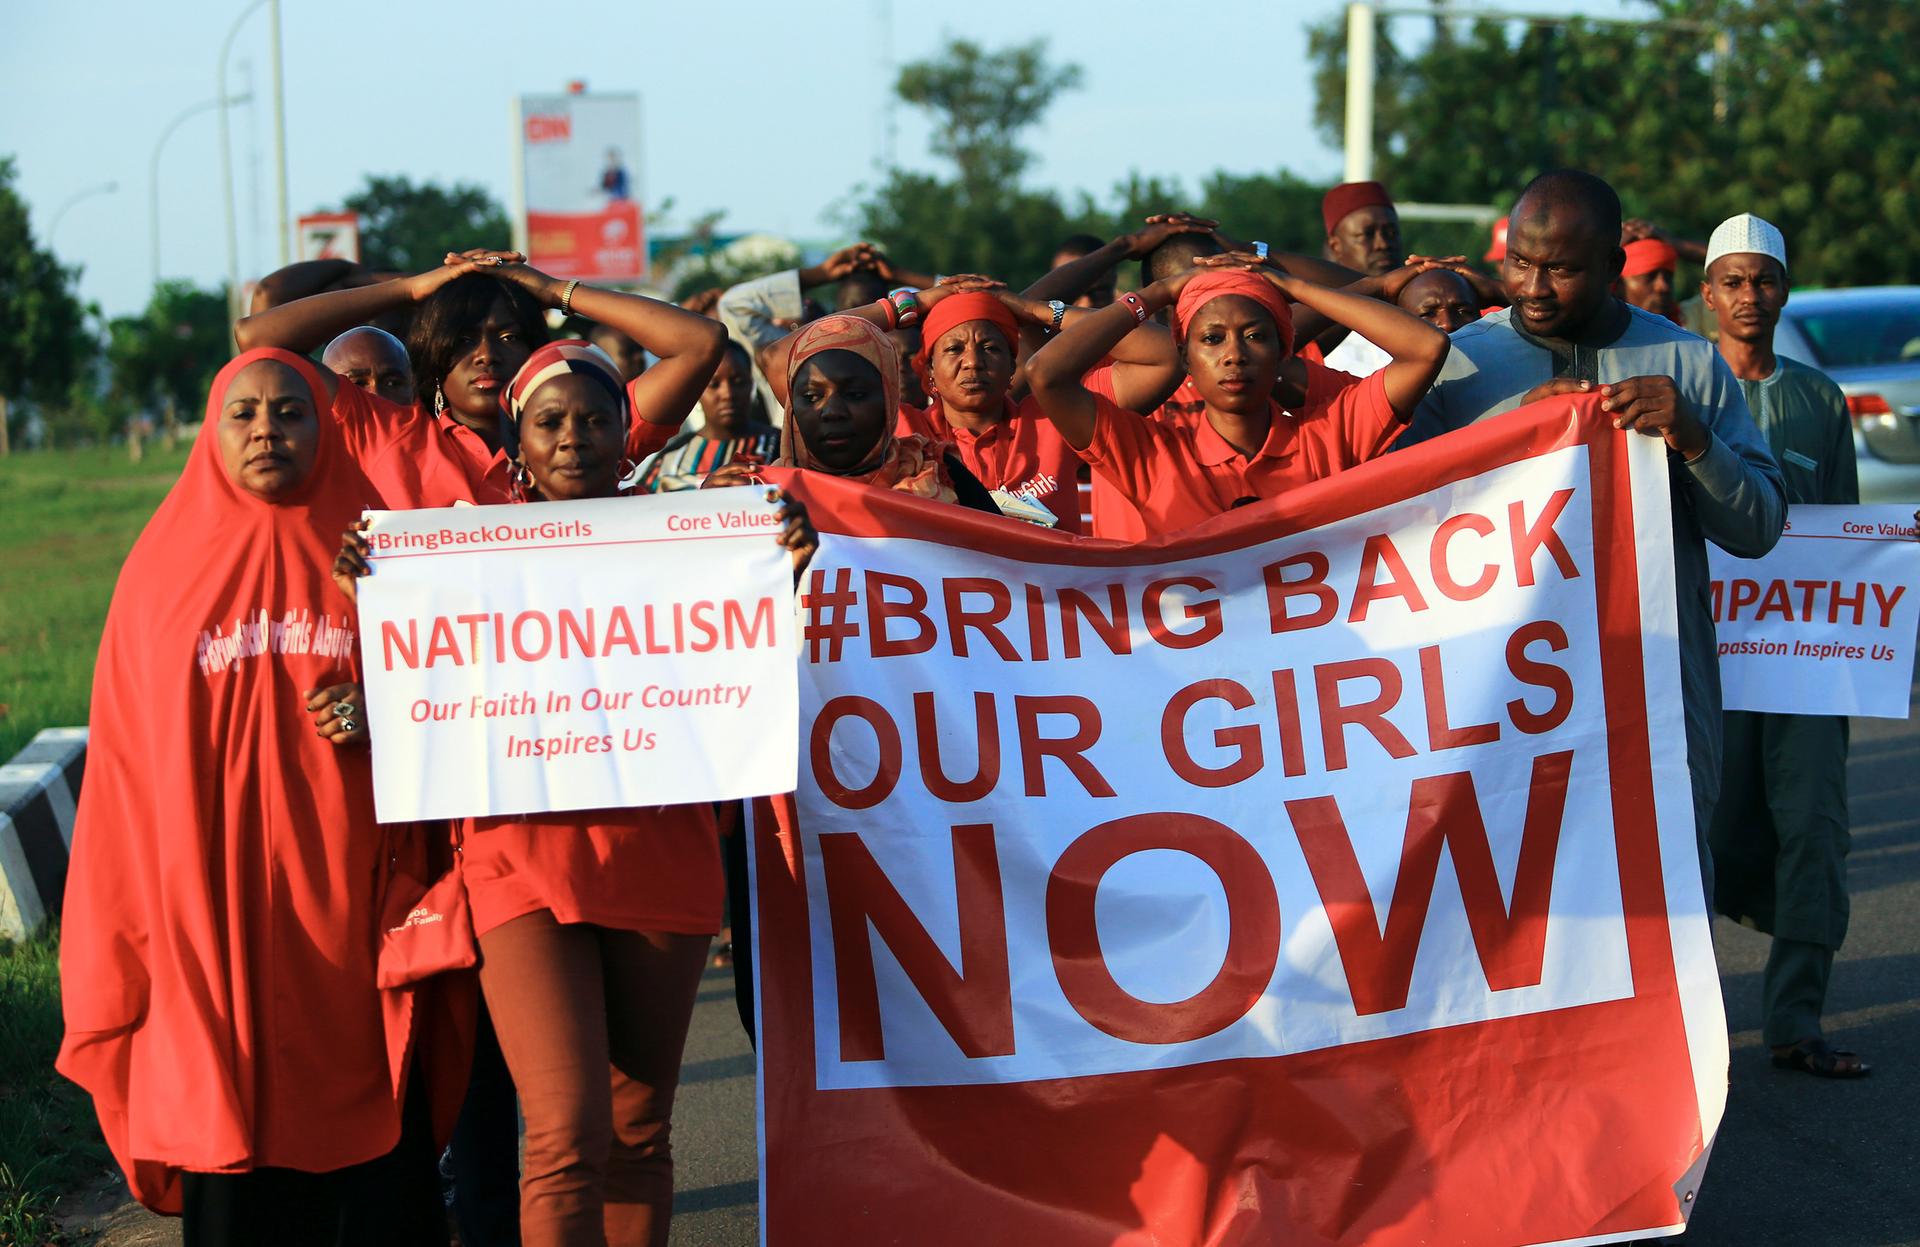 BringBackOurGirls campaigners